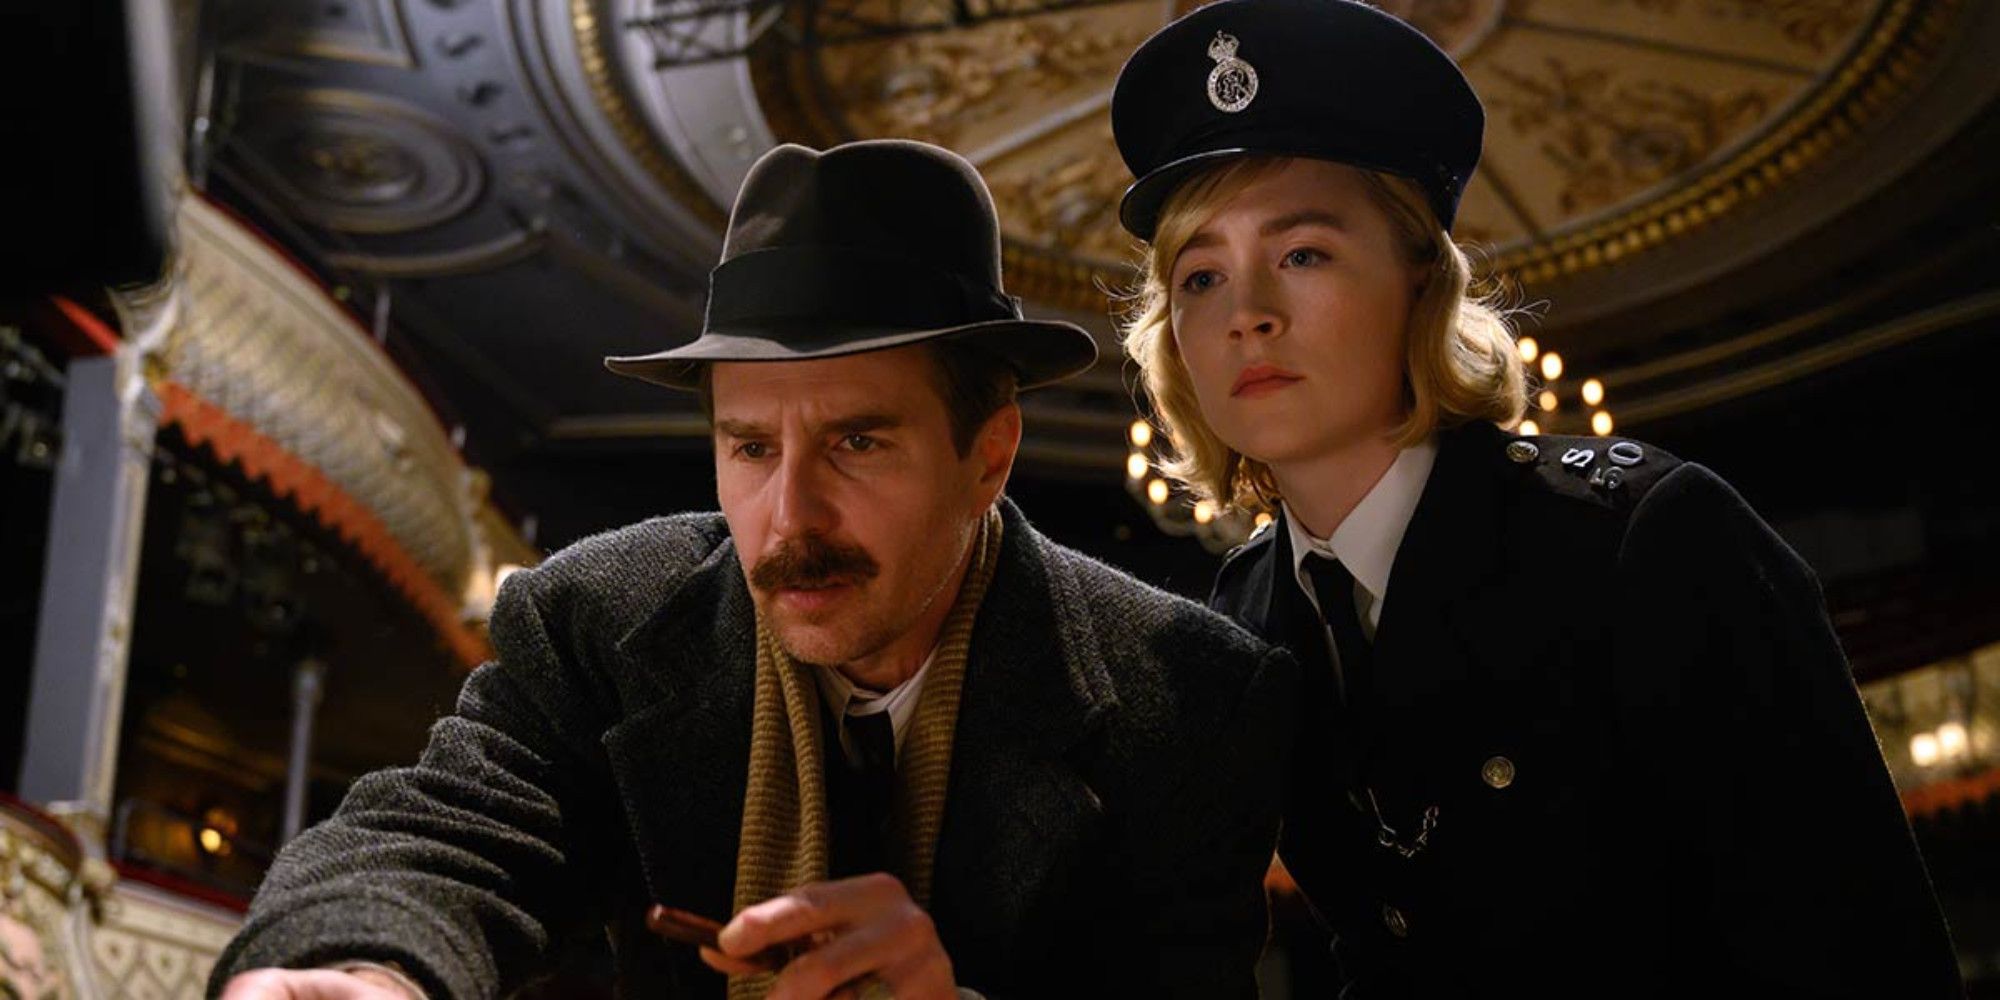 Sam Rockwell as Inspector Stoppard and Saoirse Ronan as Constable Stalker in See How They Run